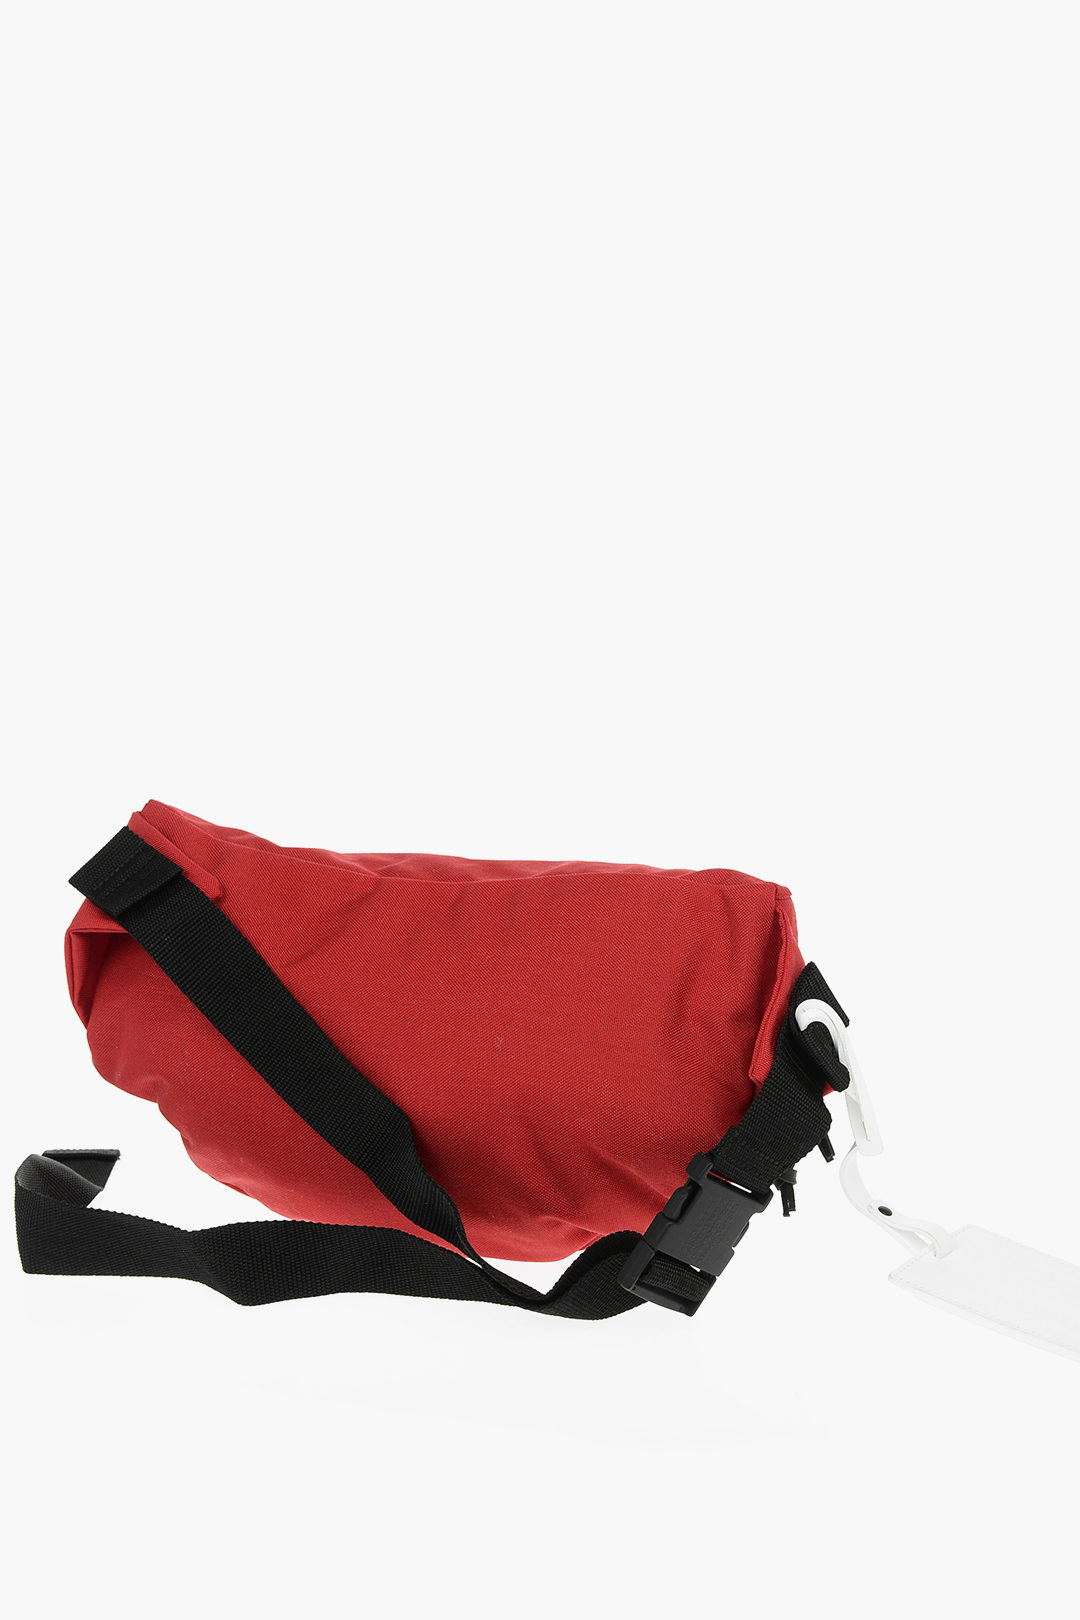 MM11 solid color fabric STEREOTYPE XL bum bag